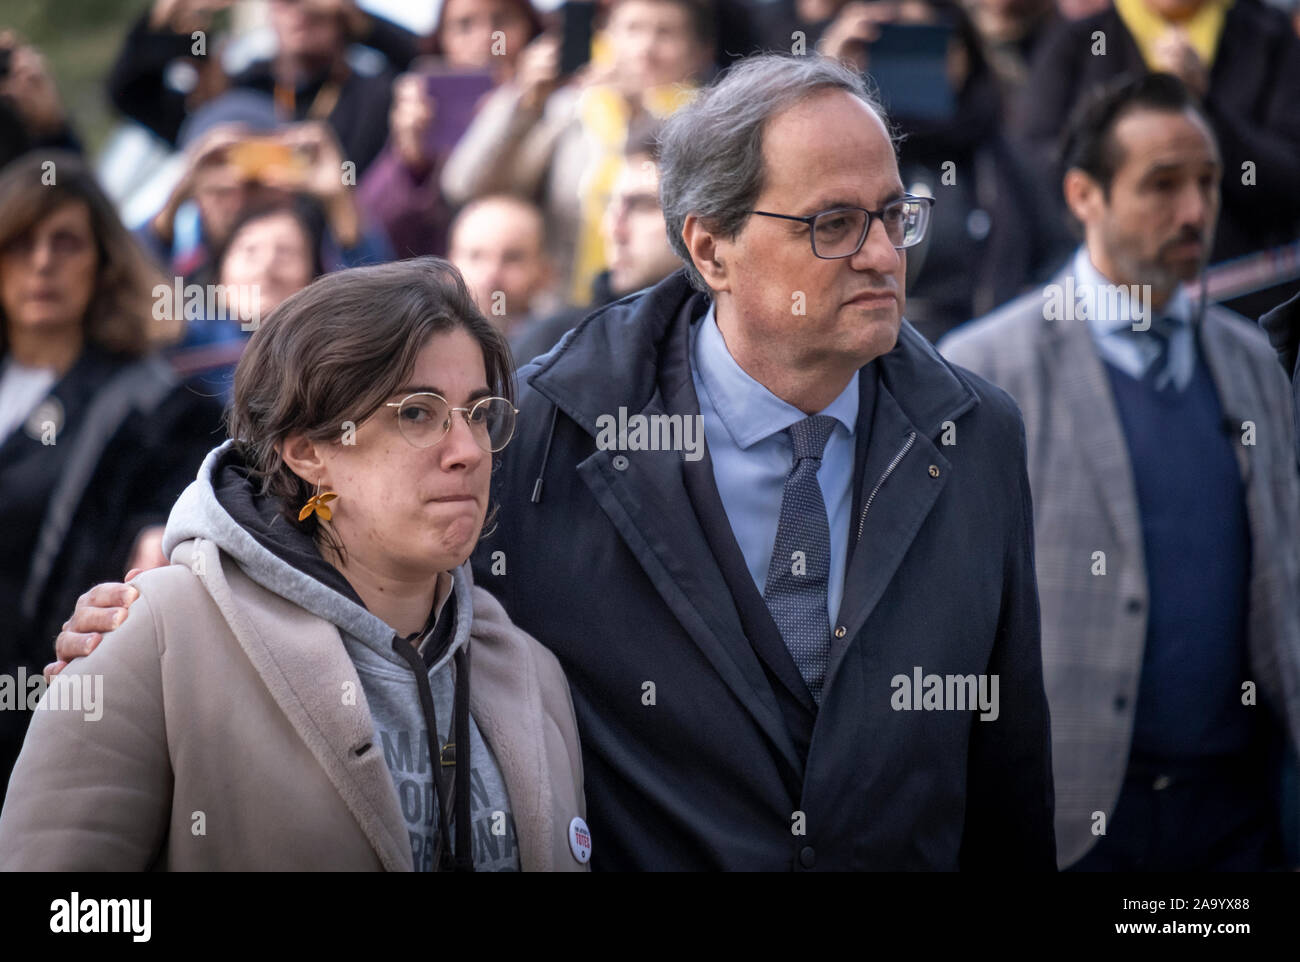 The president of the Generalidad of Catalonia Quim Torra accompanied by his daughter Carola Torra Miró arrive to testify before the Superior Court of Justice of Catalonia.The president of the Generalitat of Catalonia Quim Torra has testified today before the Superior Court of Justice of Catalonia accused of disobeying the order to withdraw symbols for the independence of Catalonia from public buildings during the 28A election campaign. Stock Photo